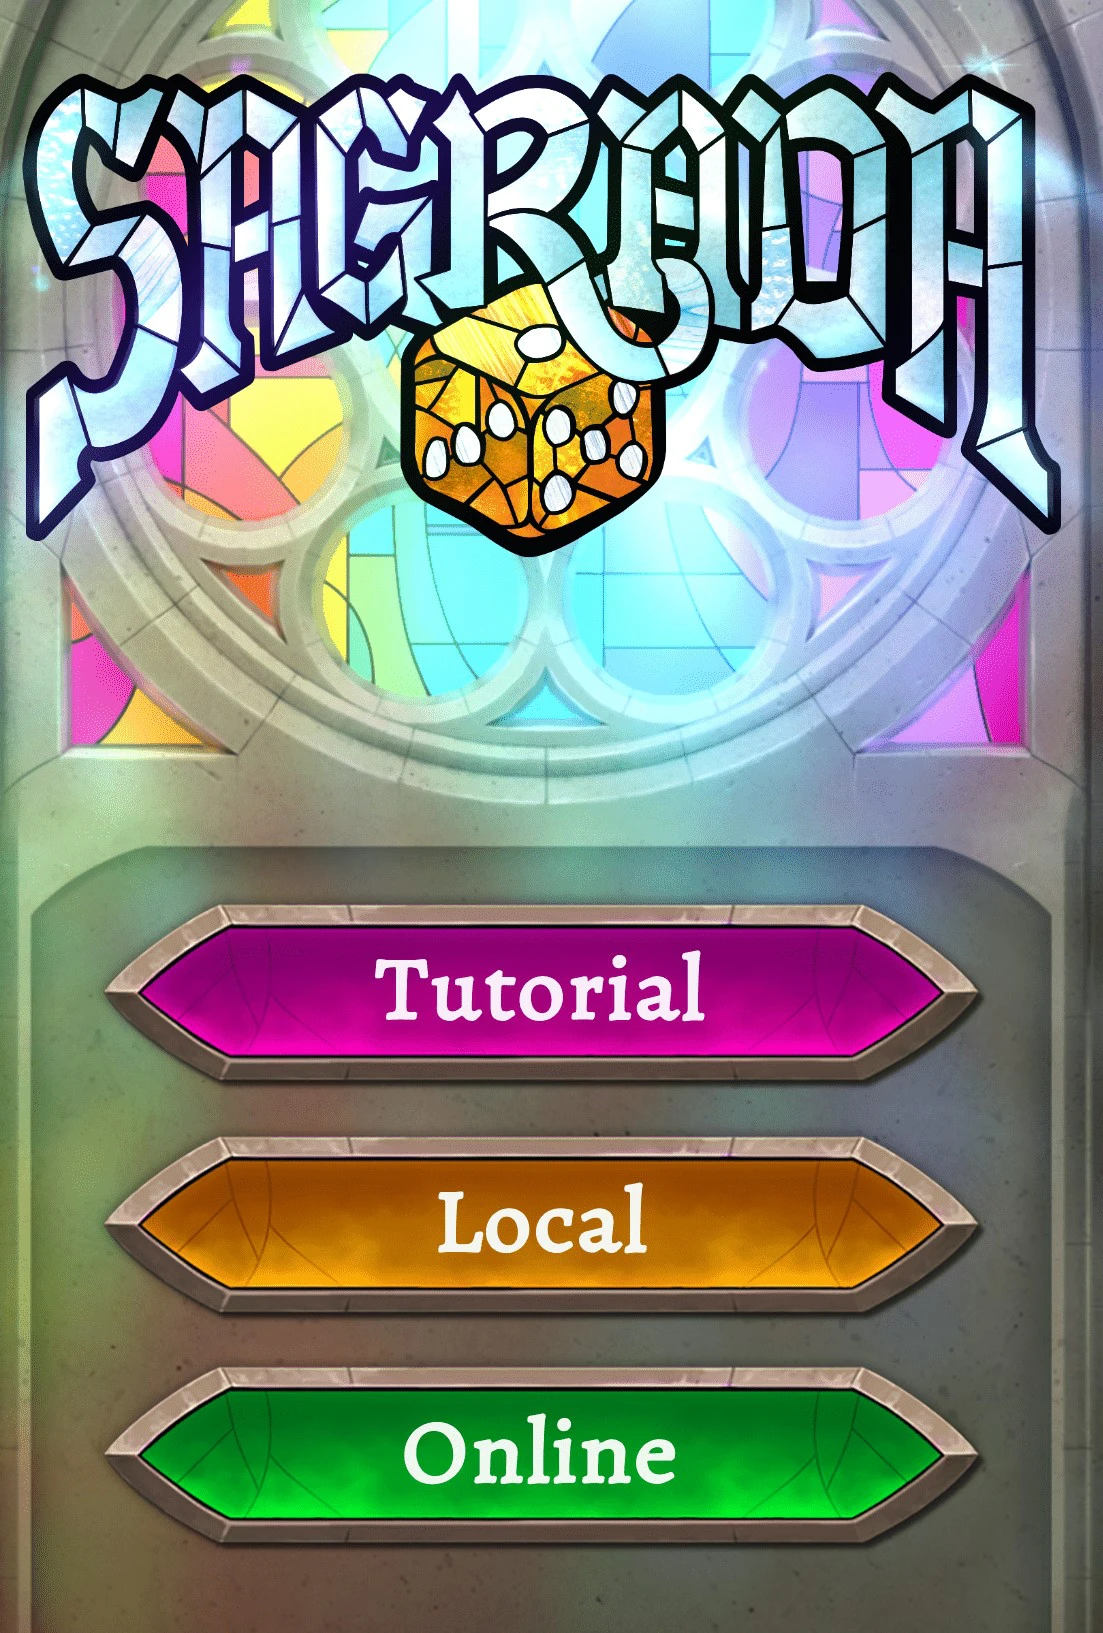 sagrada primary menu with tutorial, local, and online options